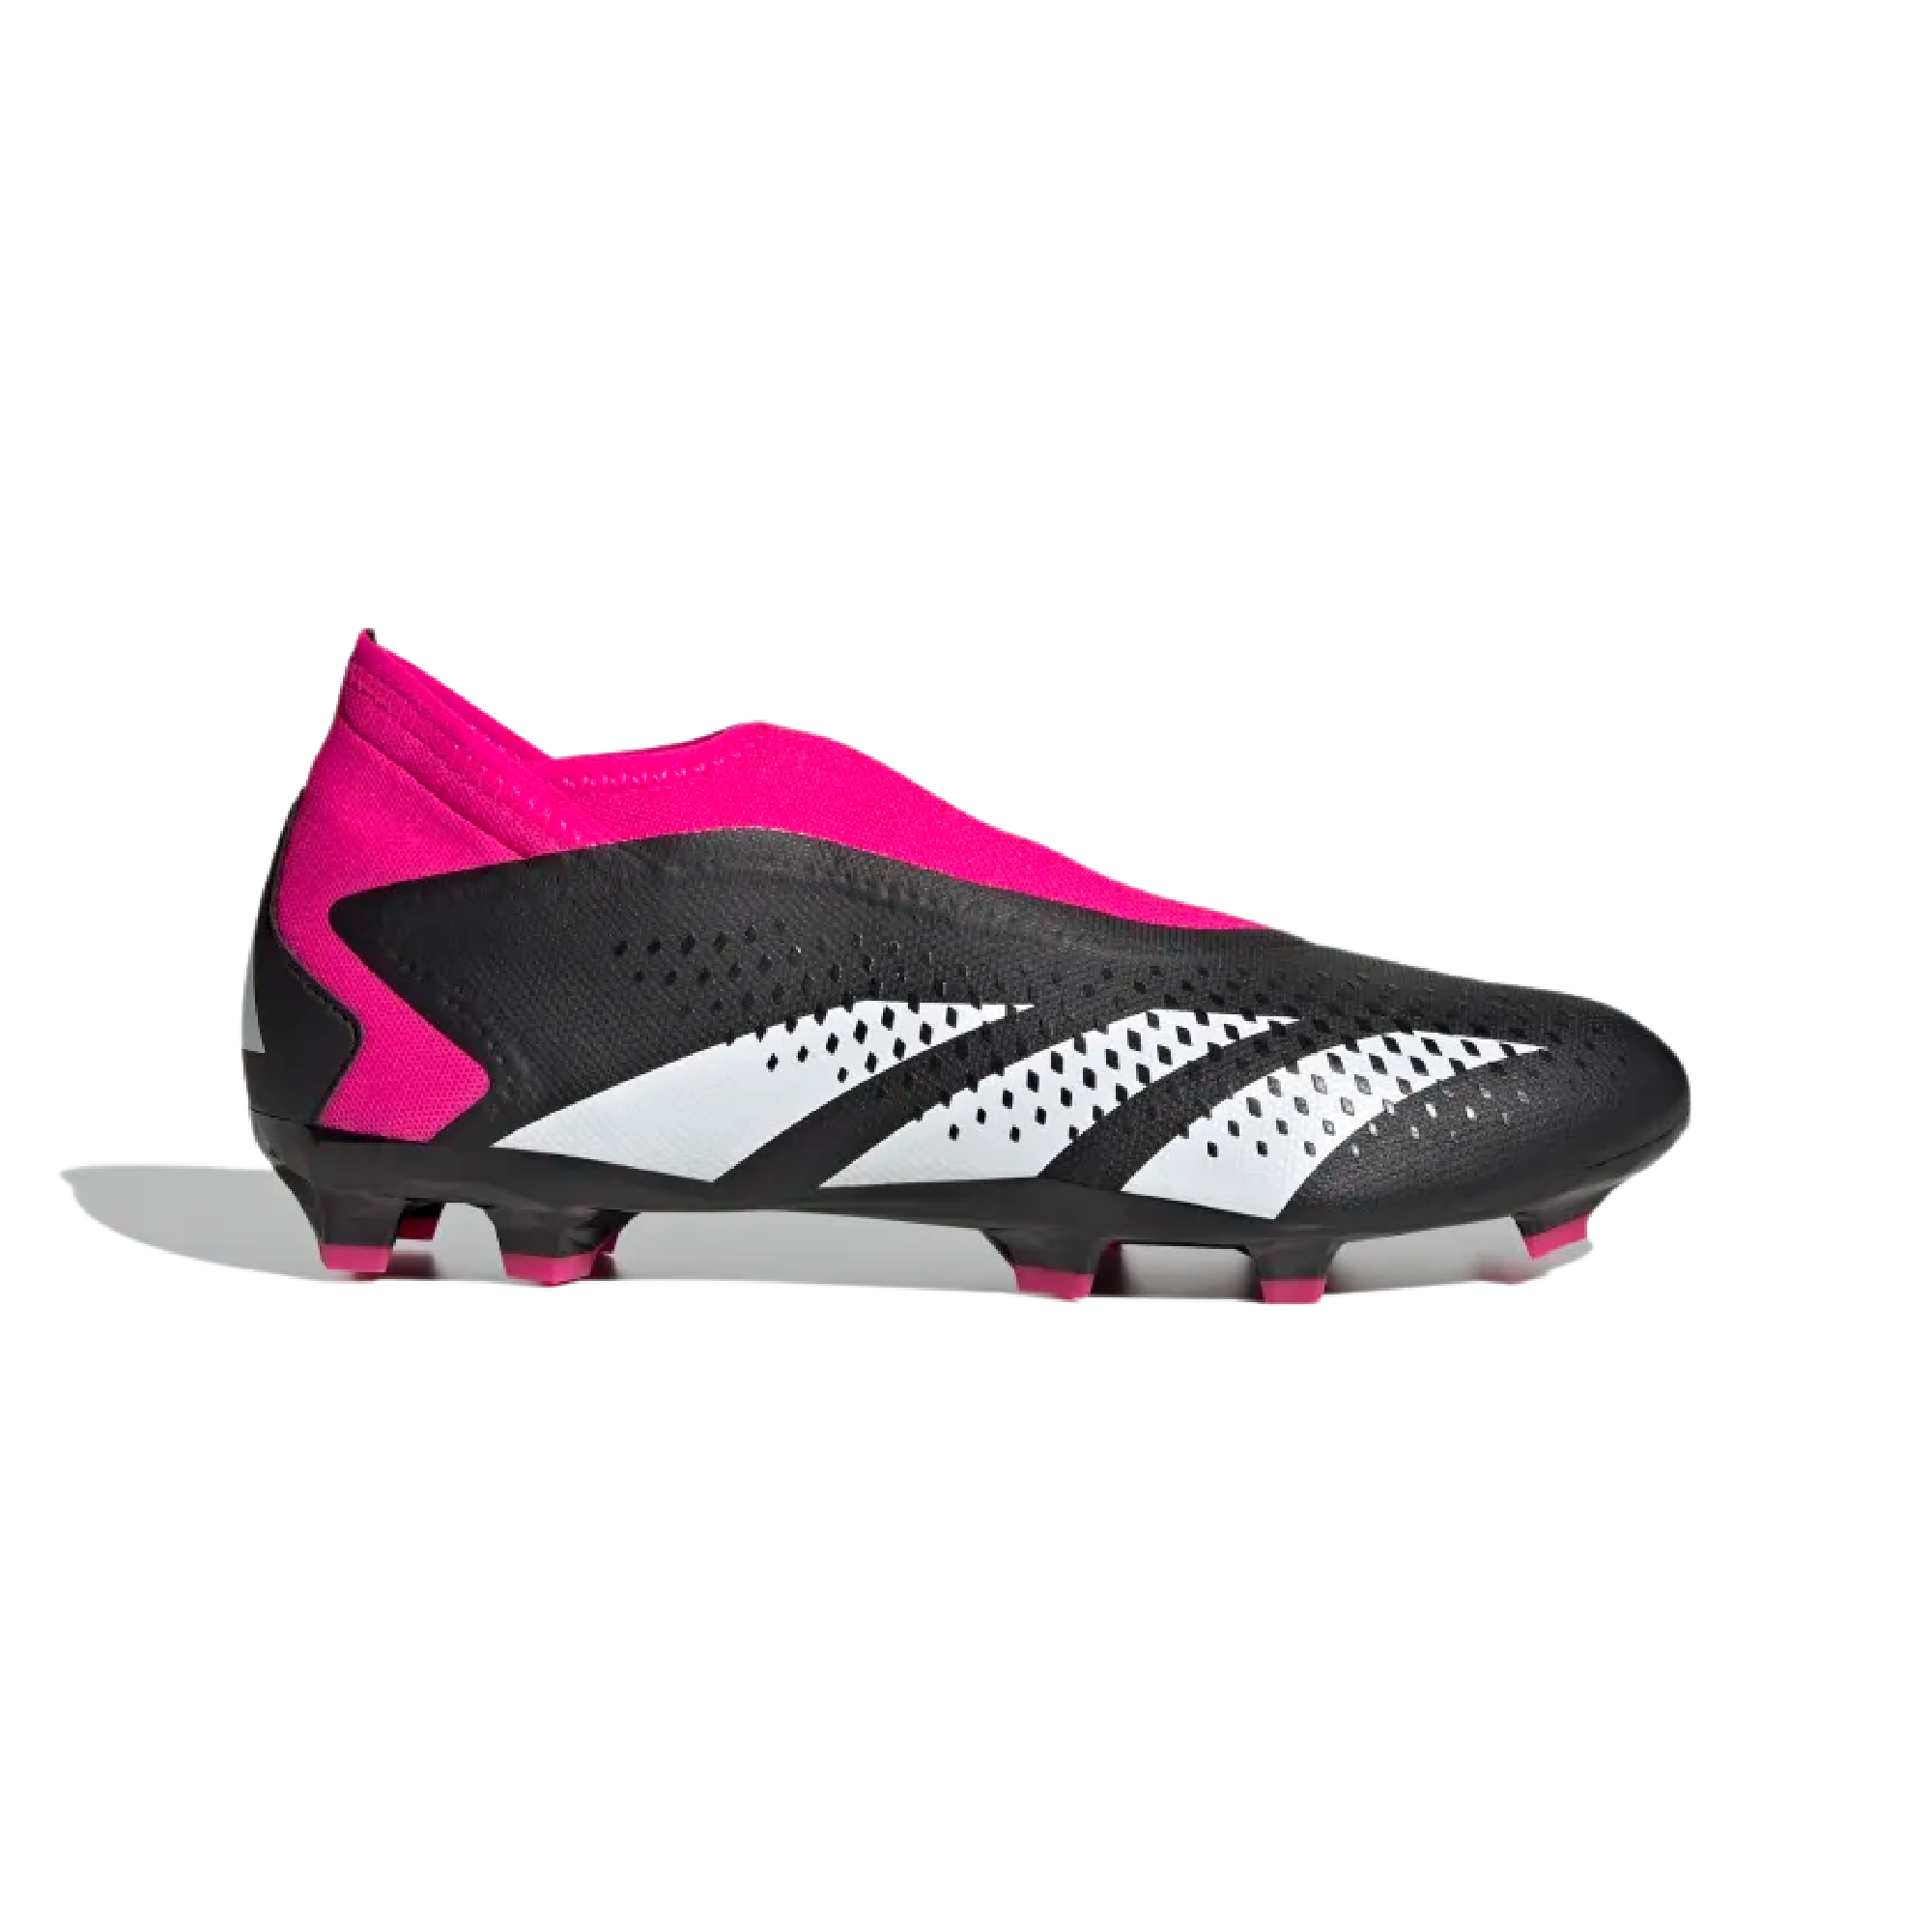 ADIDAS PREDATOR ACCURACY.3 LACELESS FIRM GROUND SOCCER-Core Black / Cloud White / Team Shock Pink 2